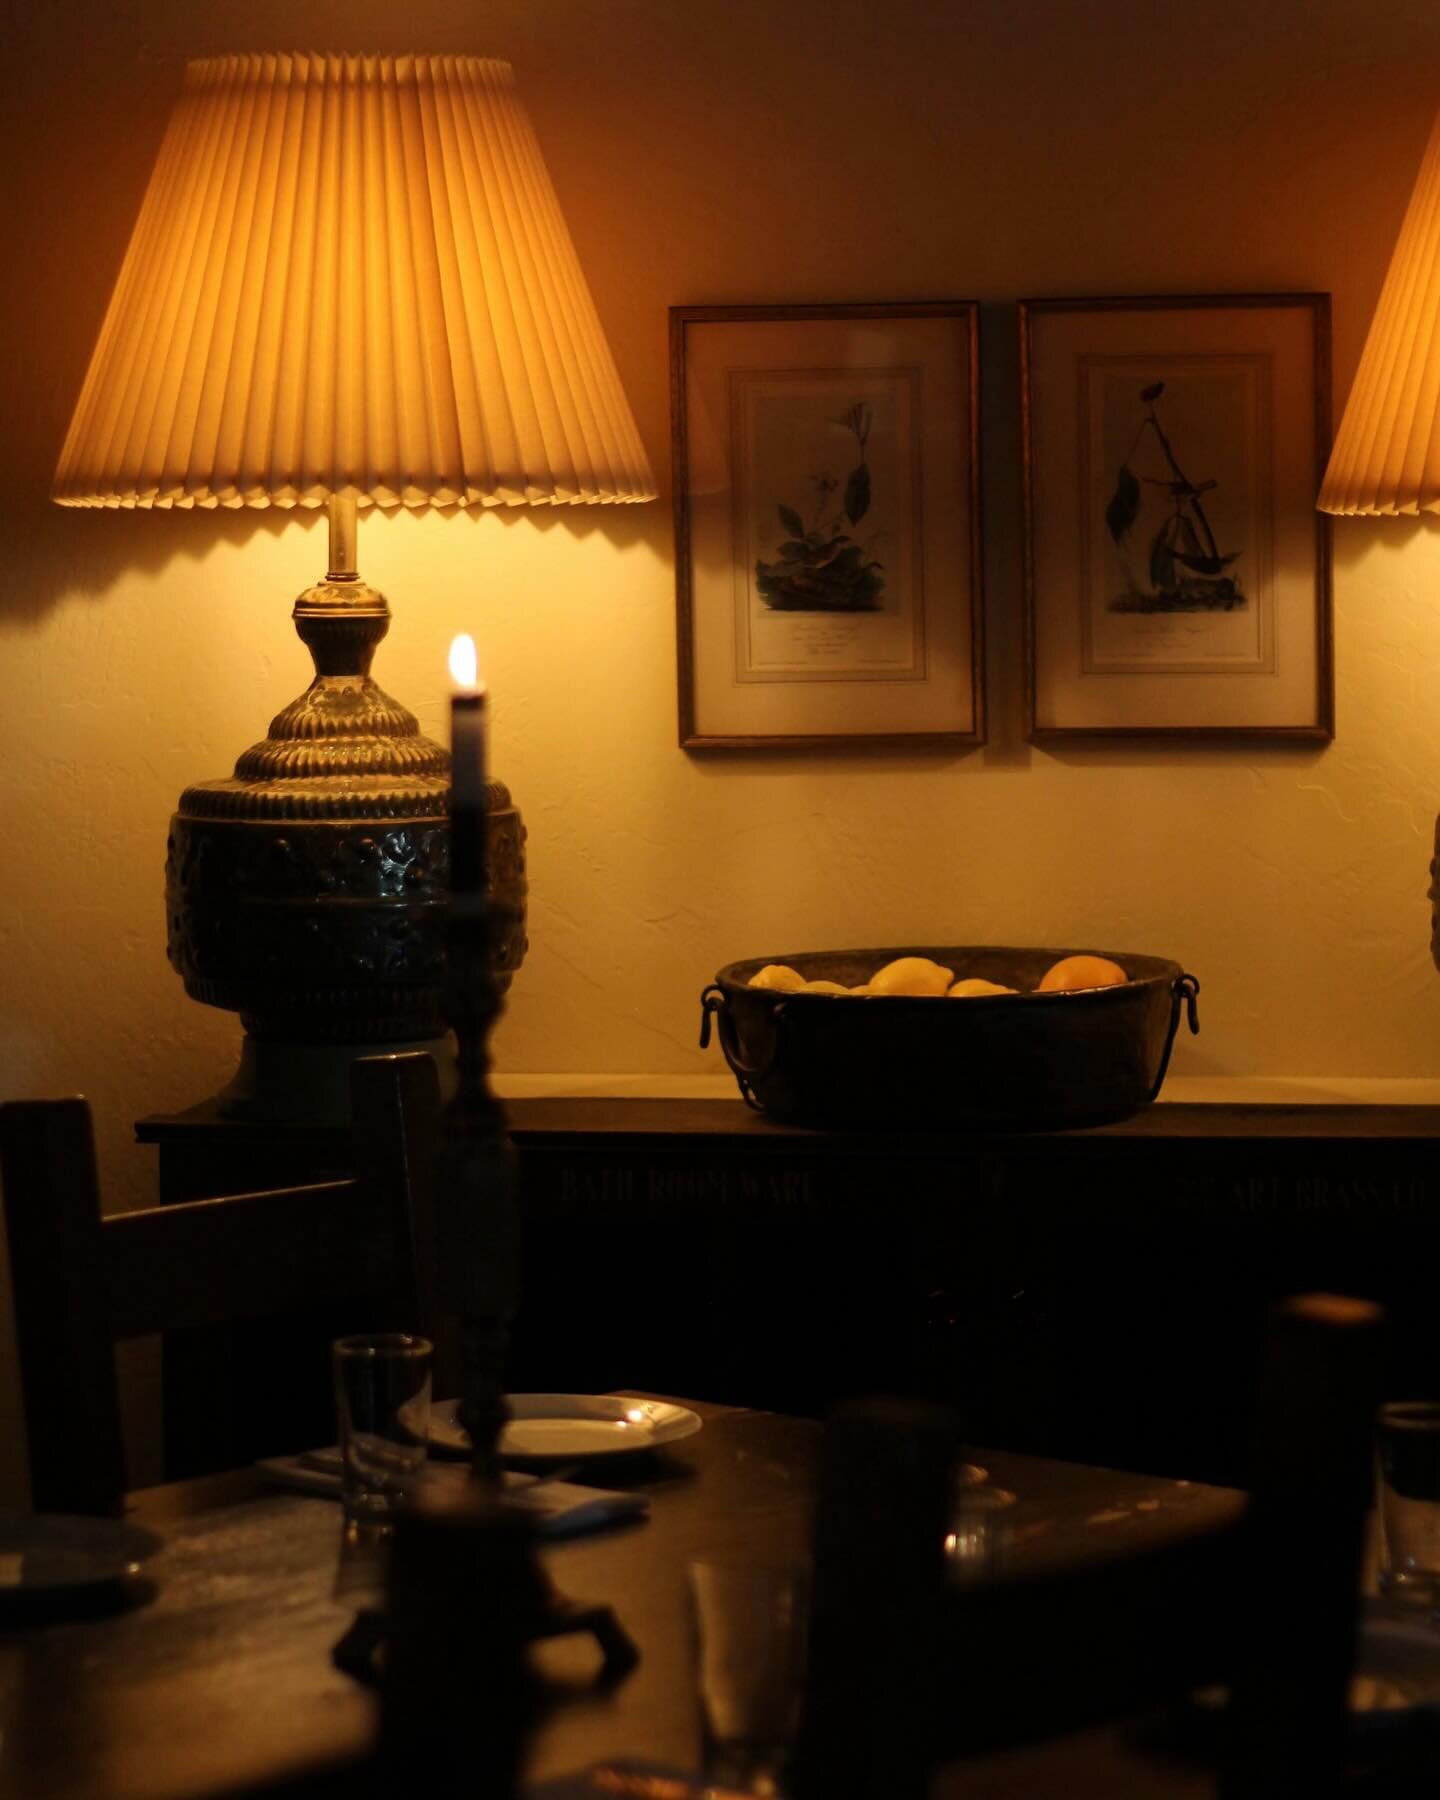 Antique lamps and candlelight create the perfect atmosphere, don&rsquo;t you think?